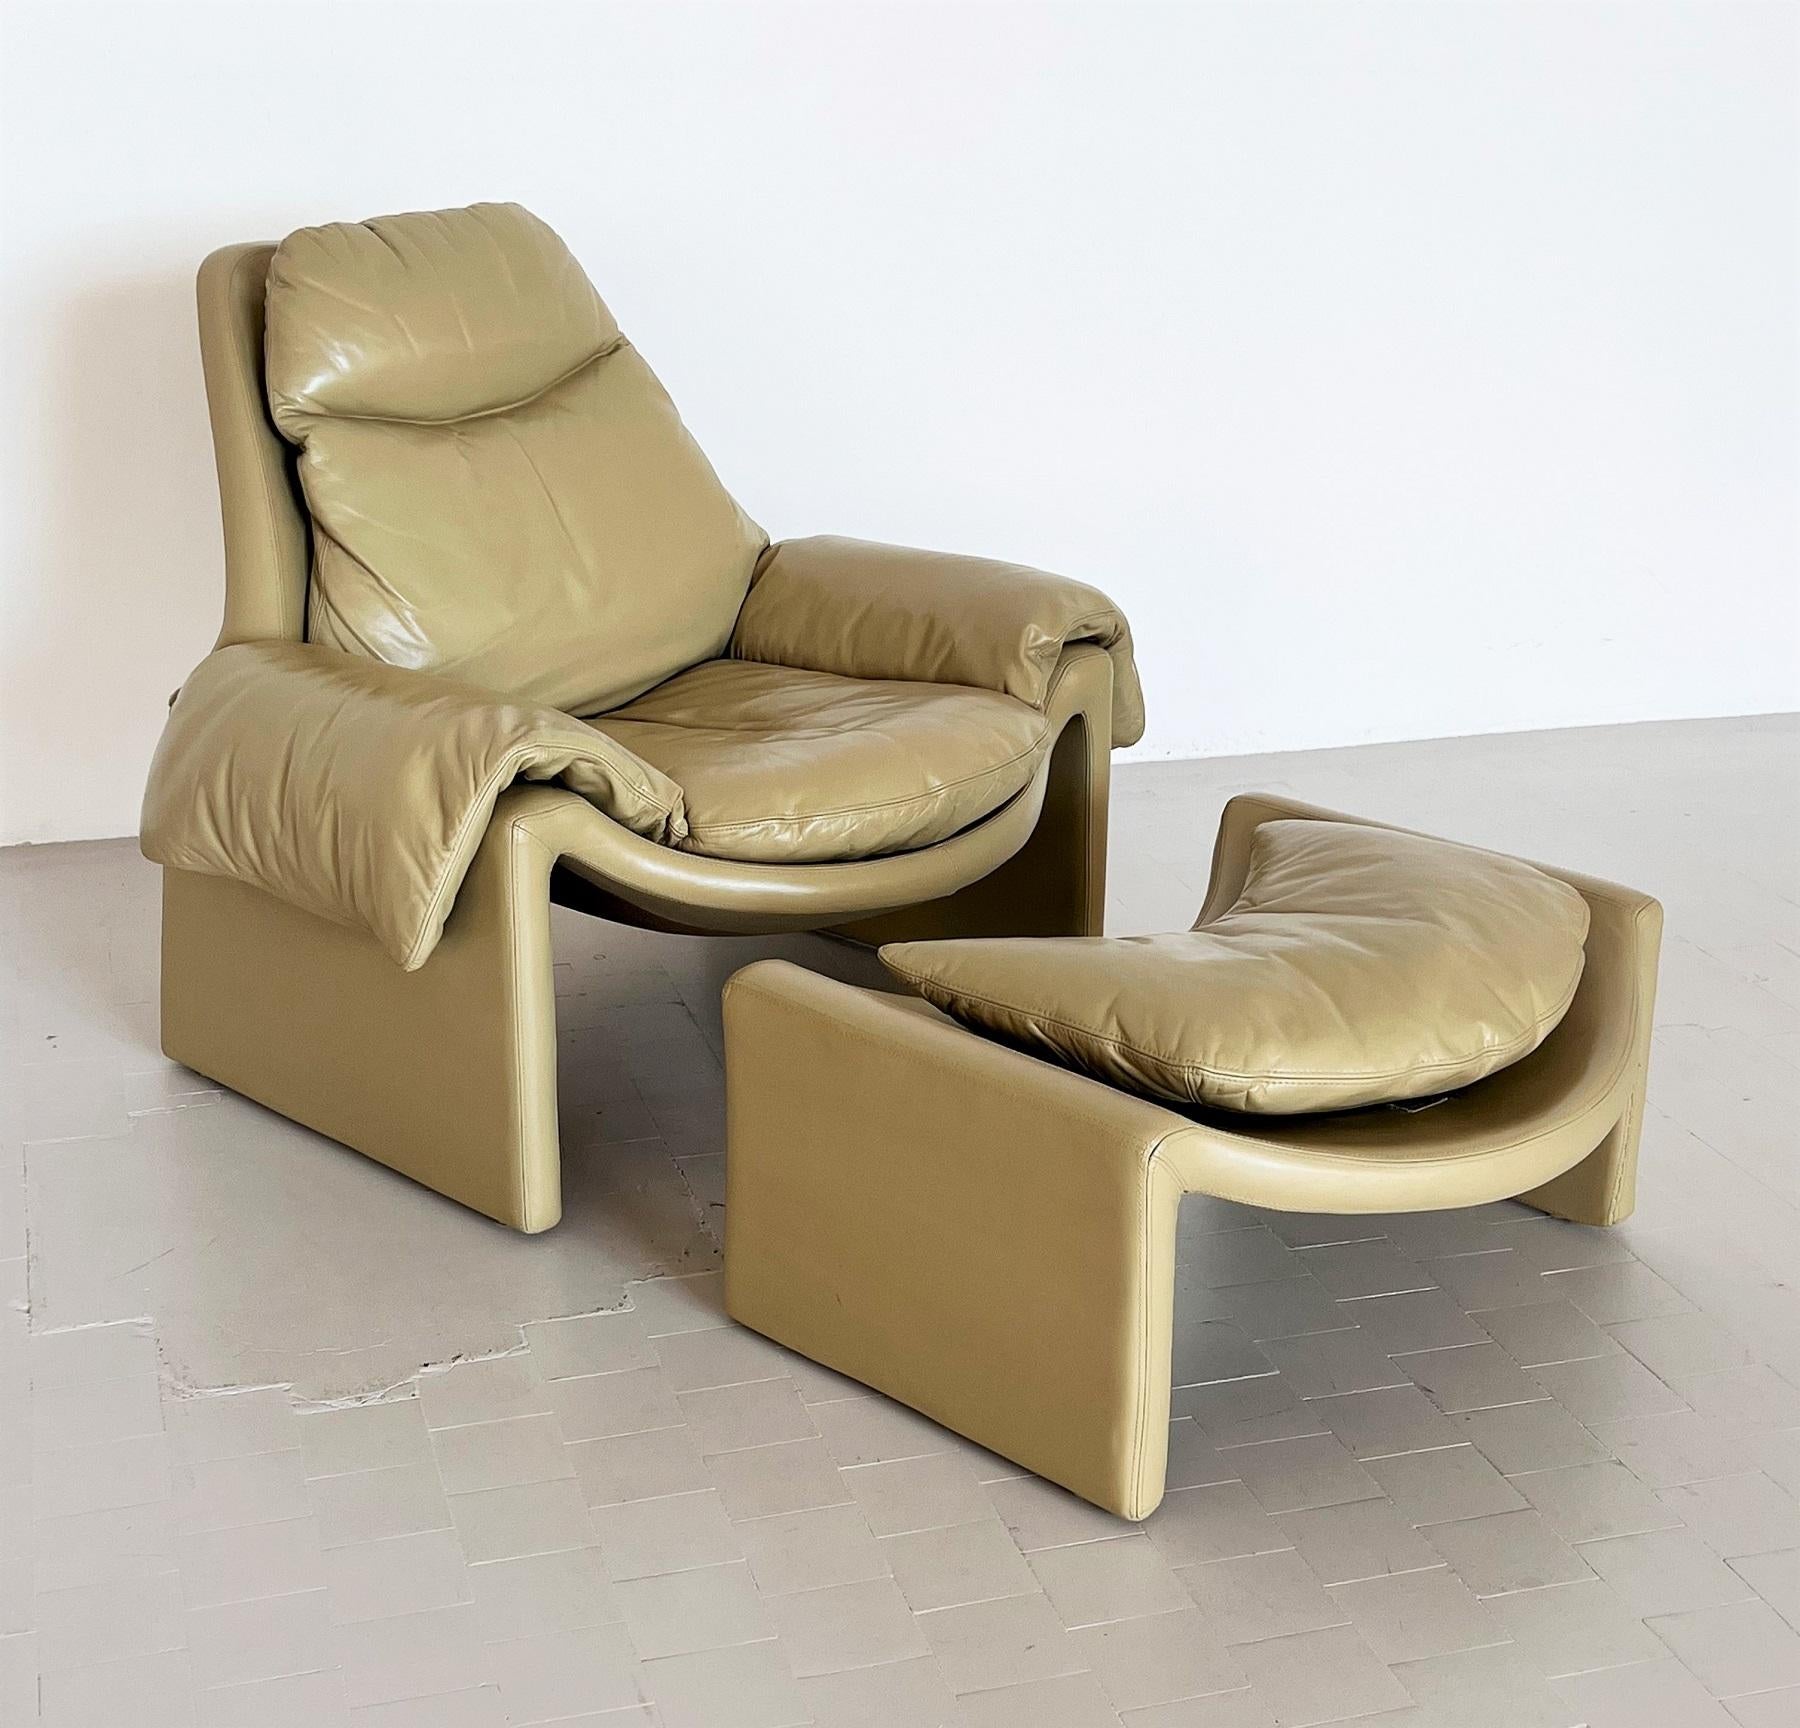 Vittorio Introini P60 Set of Lounge Chair with Ottoman for Saporiti, 1960s For Sale 12